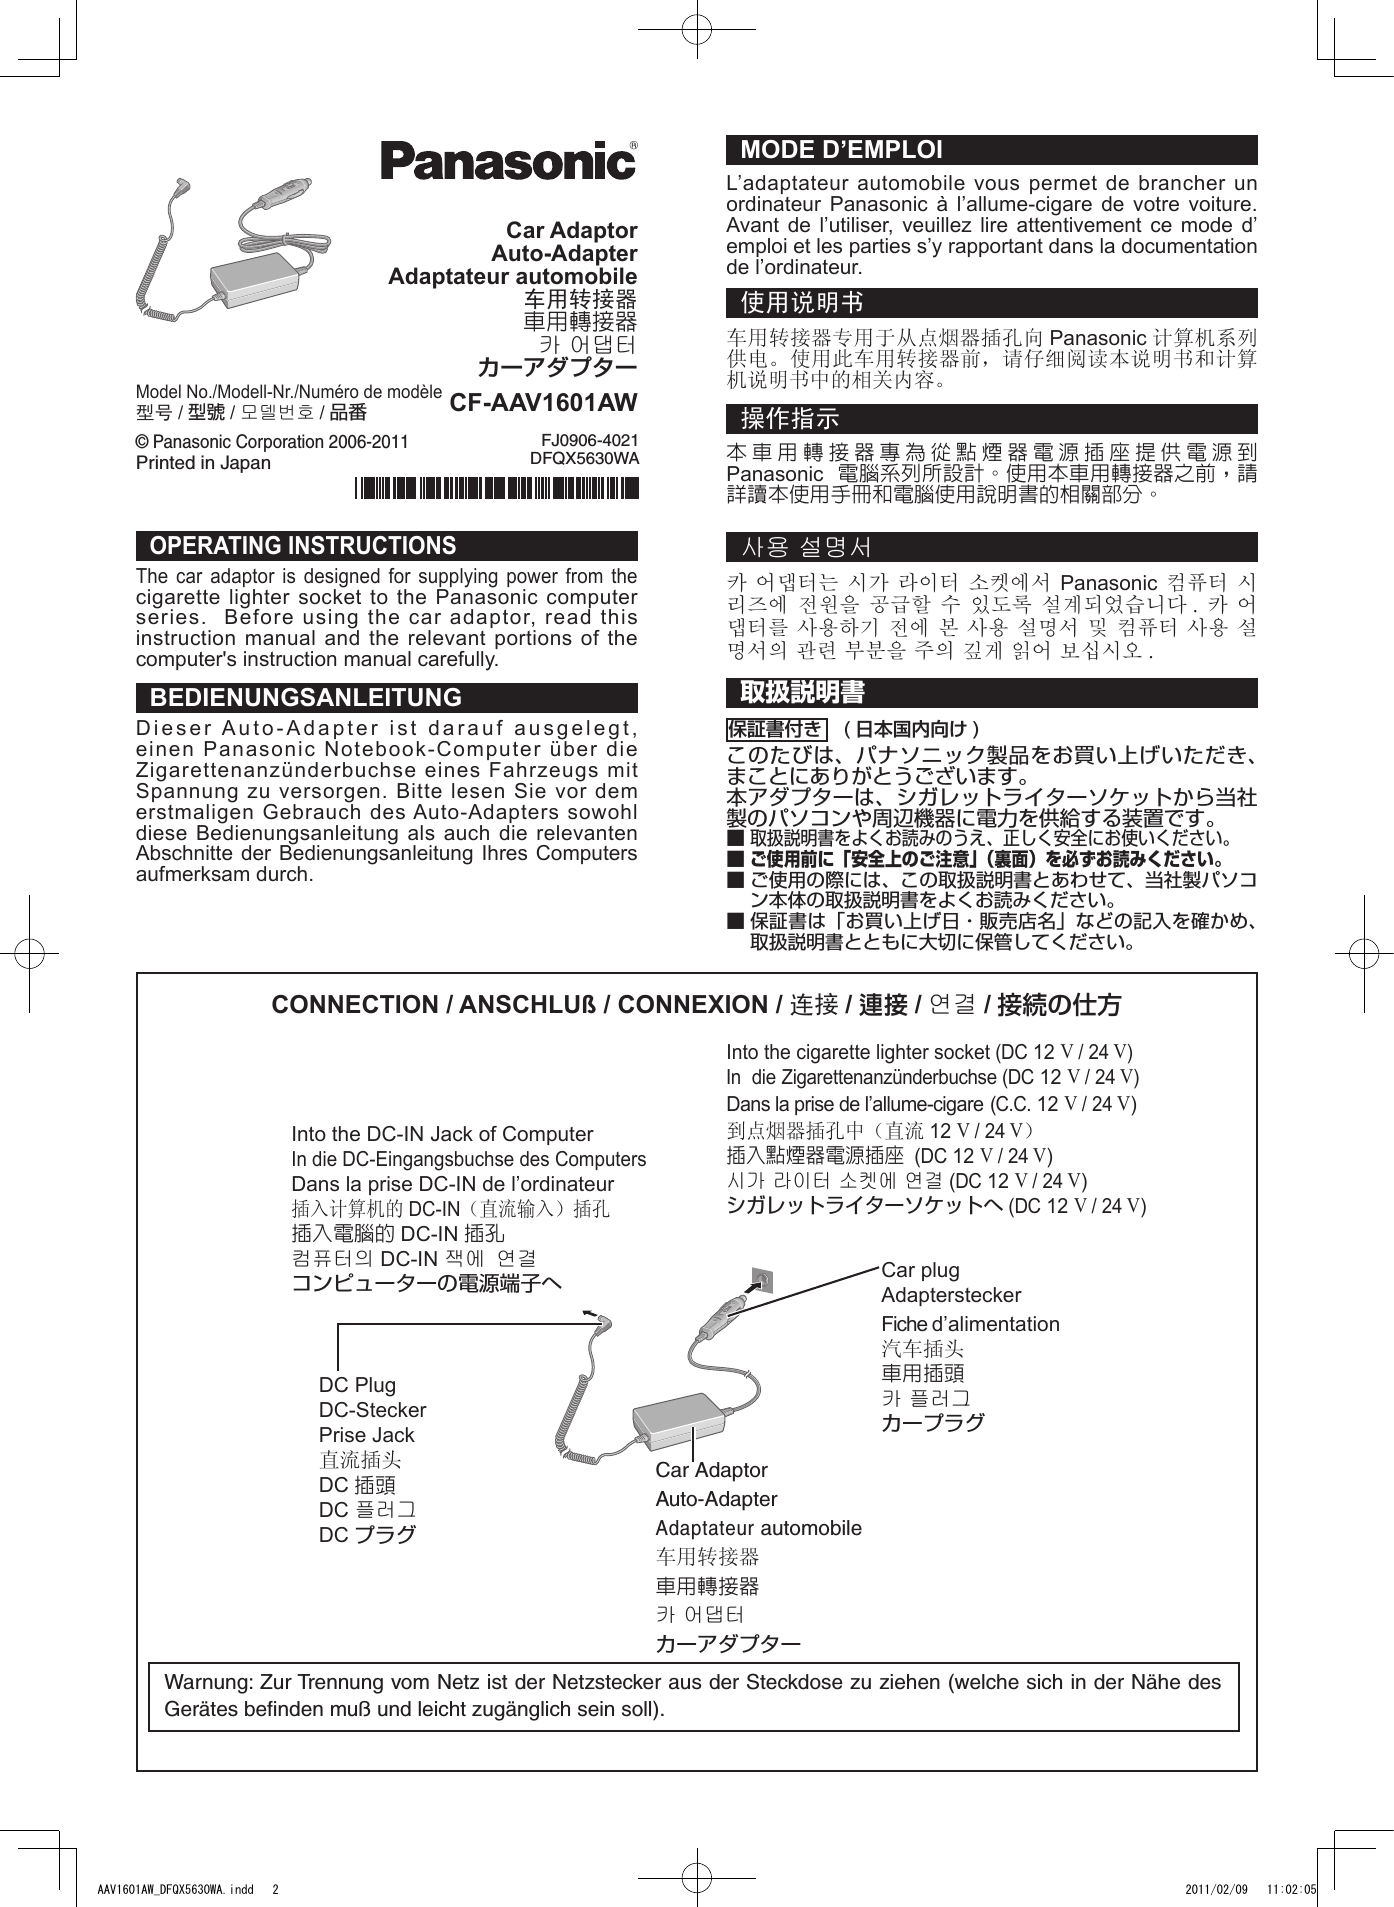 Page 1 of 8 - Panasonic CF-AAxxxx (AC Adapter) 使用手册 : Operating Instructions (English/ German/ French/ Chinese[S]/ Chinese[T]/ Korean/ Japanese) (Revision) Aav1601aw-oi-dfqx5630wa-non-nonlogo-JMGFCSCTKO-p20110072